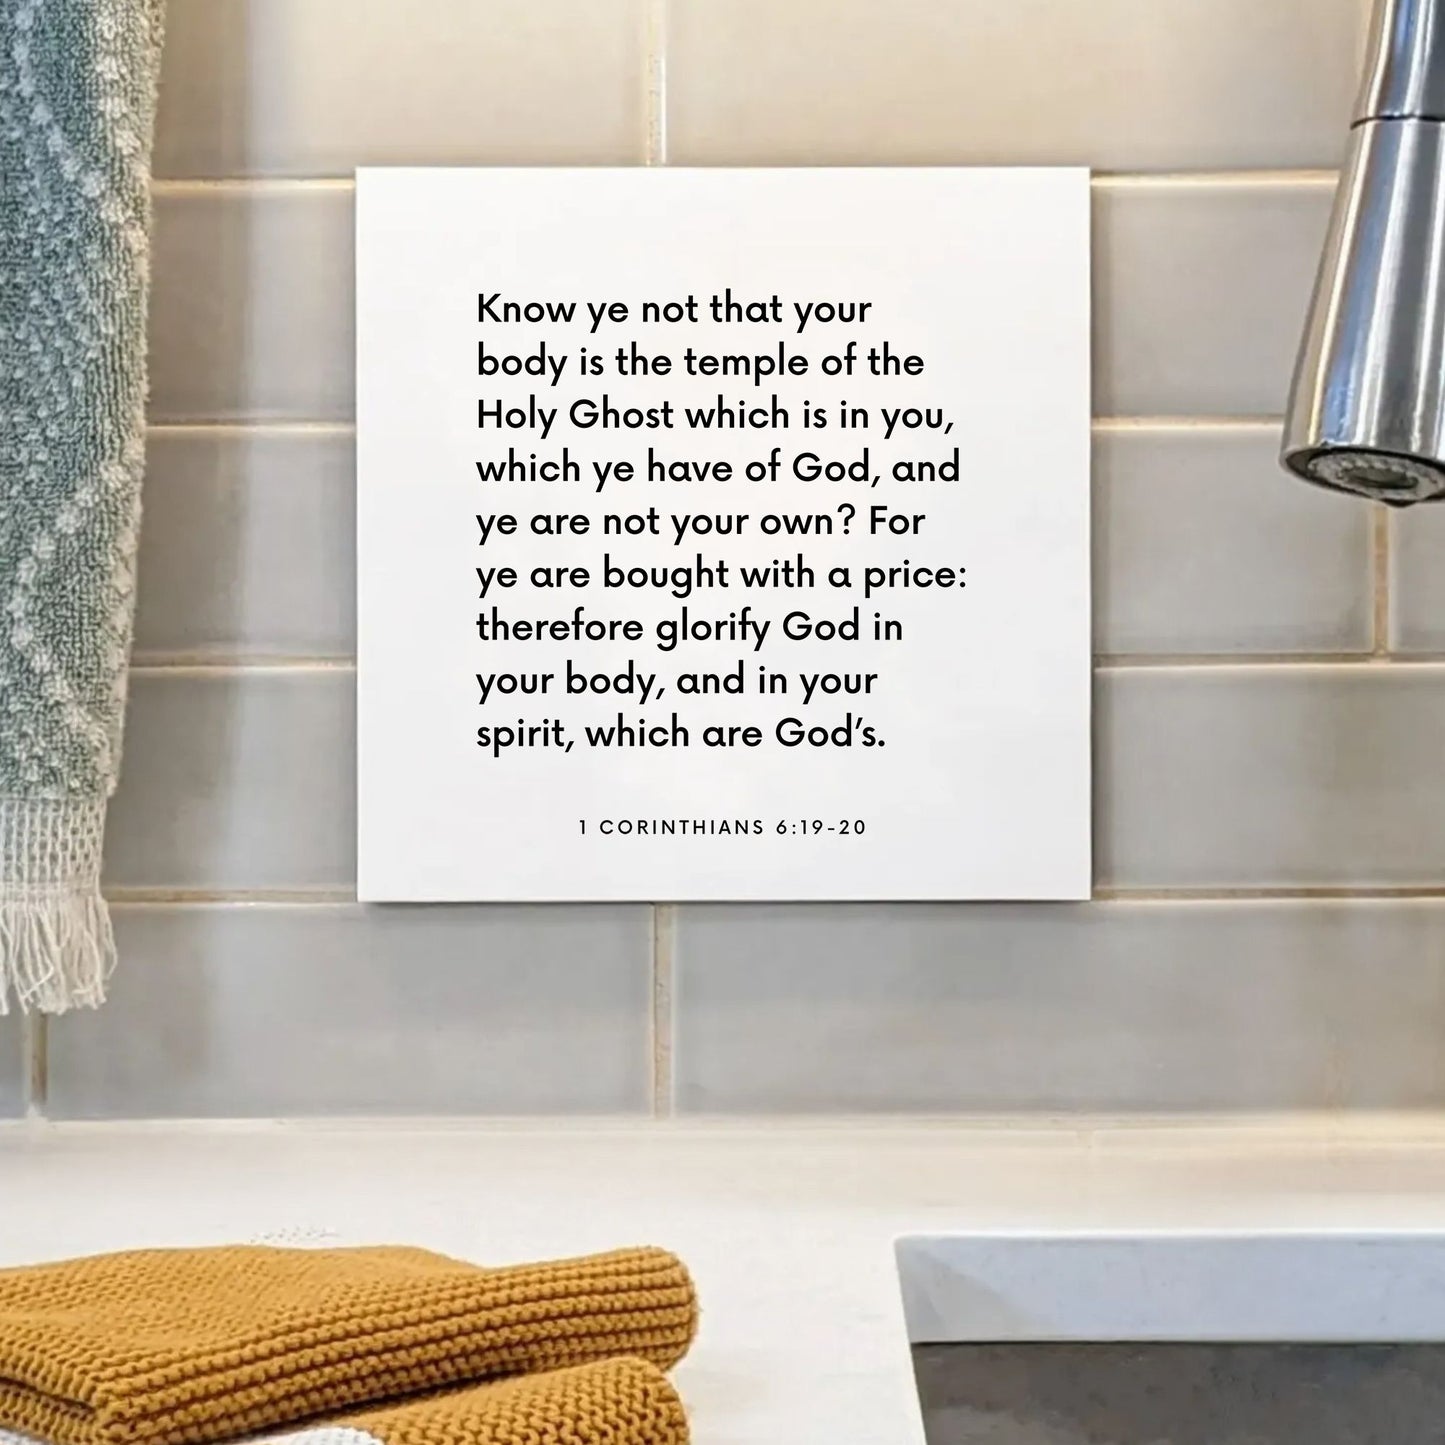 Sink mouting of the scripture tile for 1 Corinthians 6:19-20 - "Know ye not that your body is the temple of the Holy Ghost"